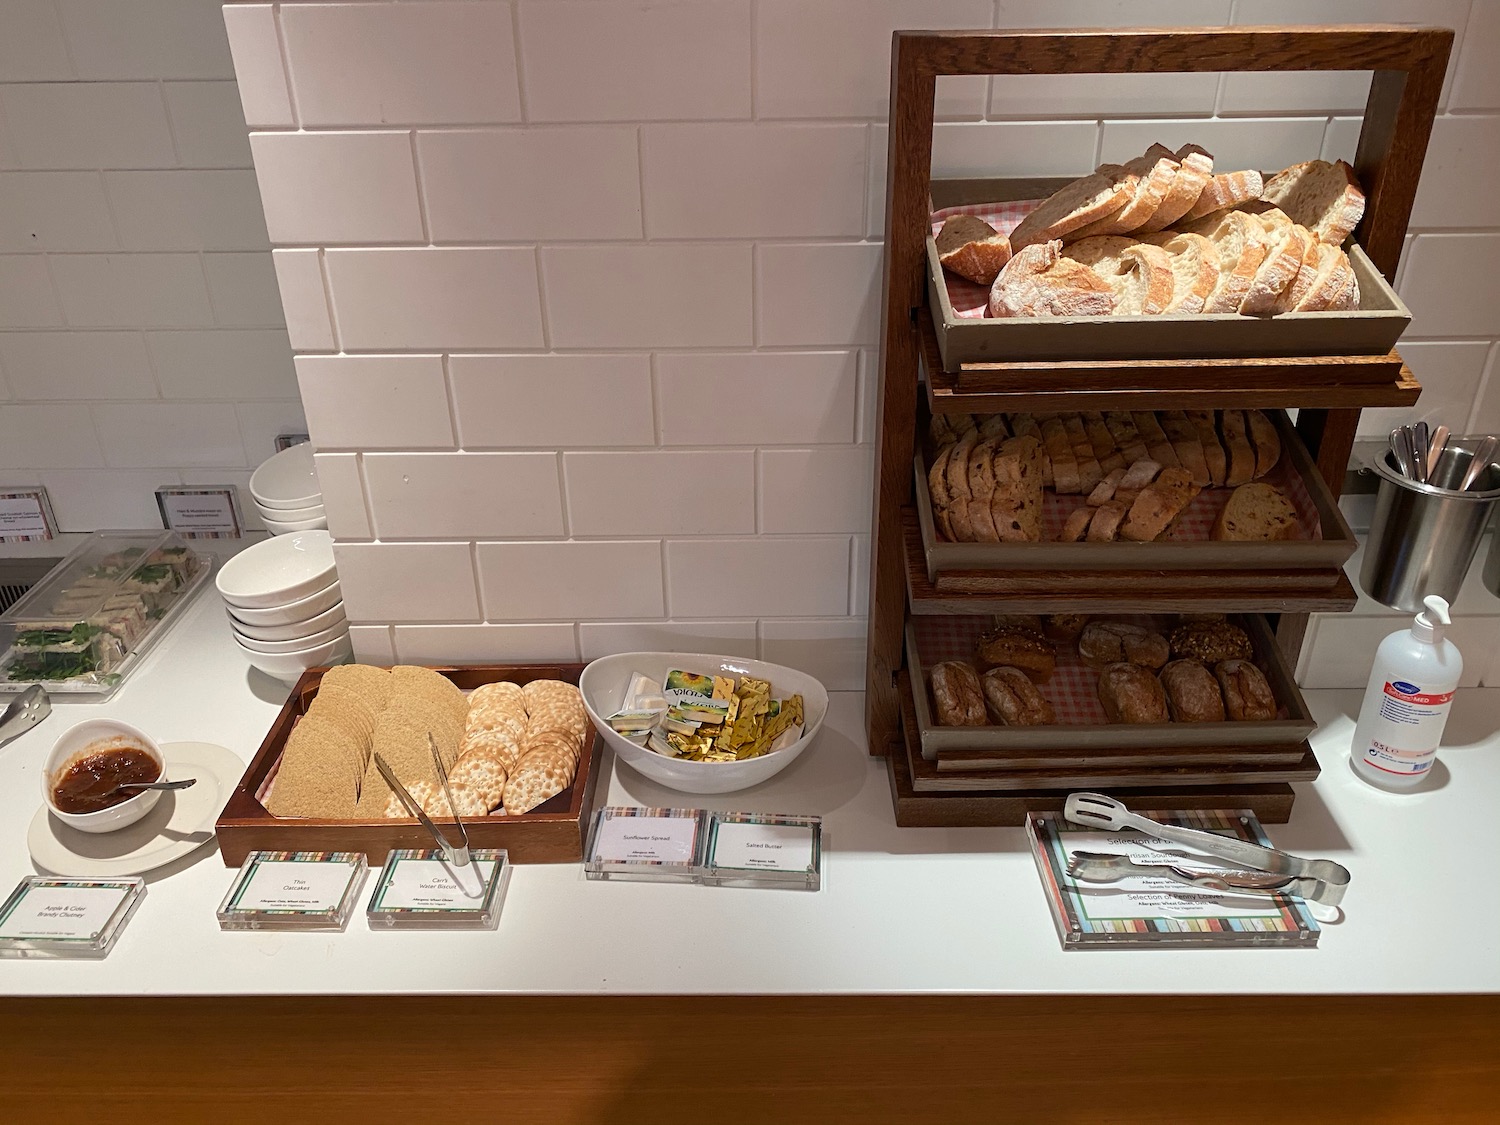 a trays of bread and pastries on a counter